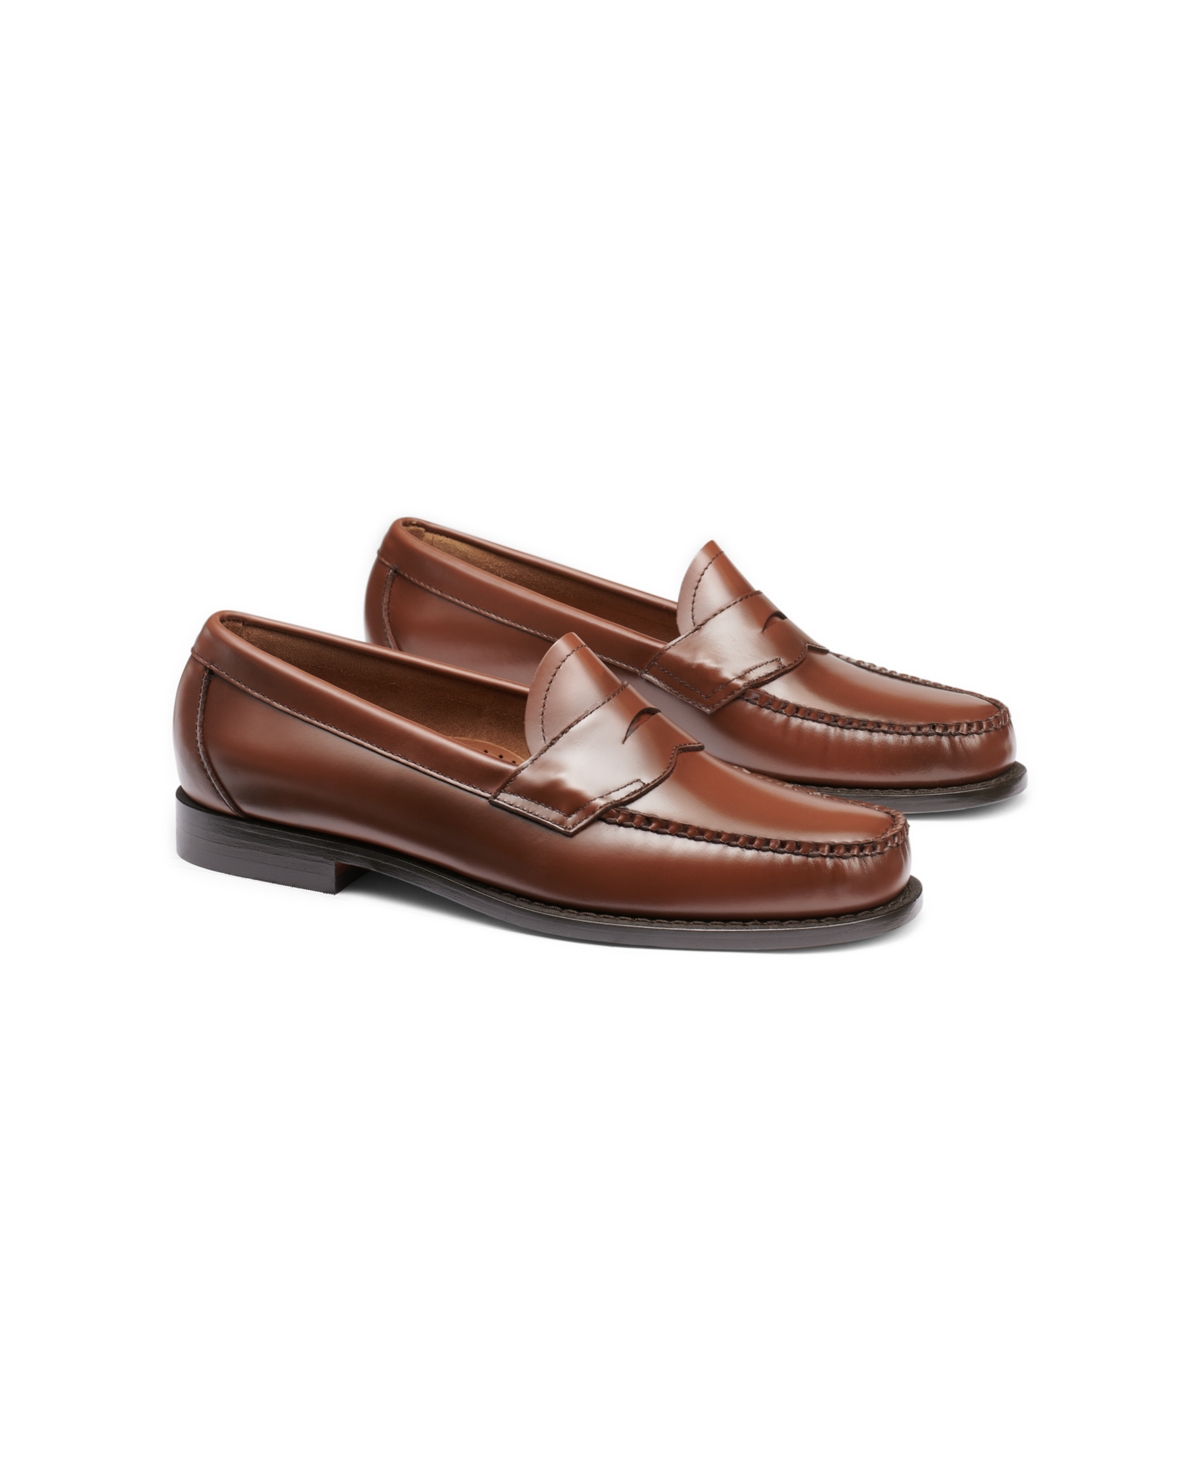 Gh Bass G.h.bass Men's Logan Weejuns Penny Loafers In Cognac